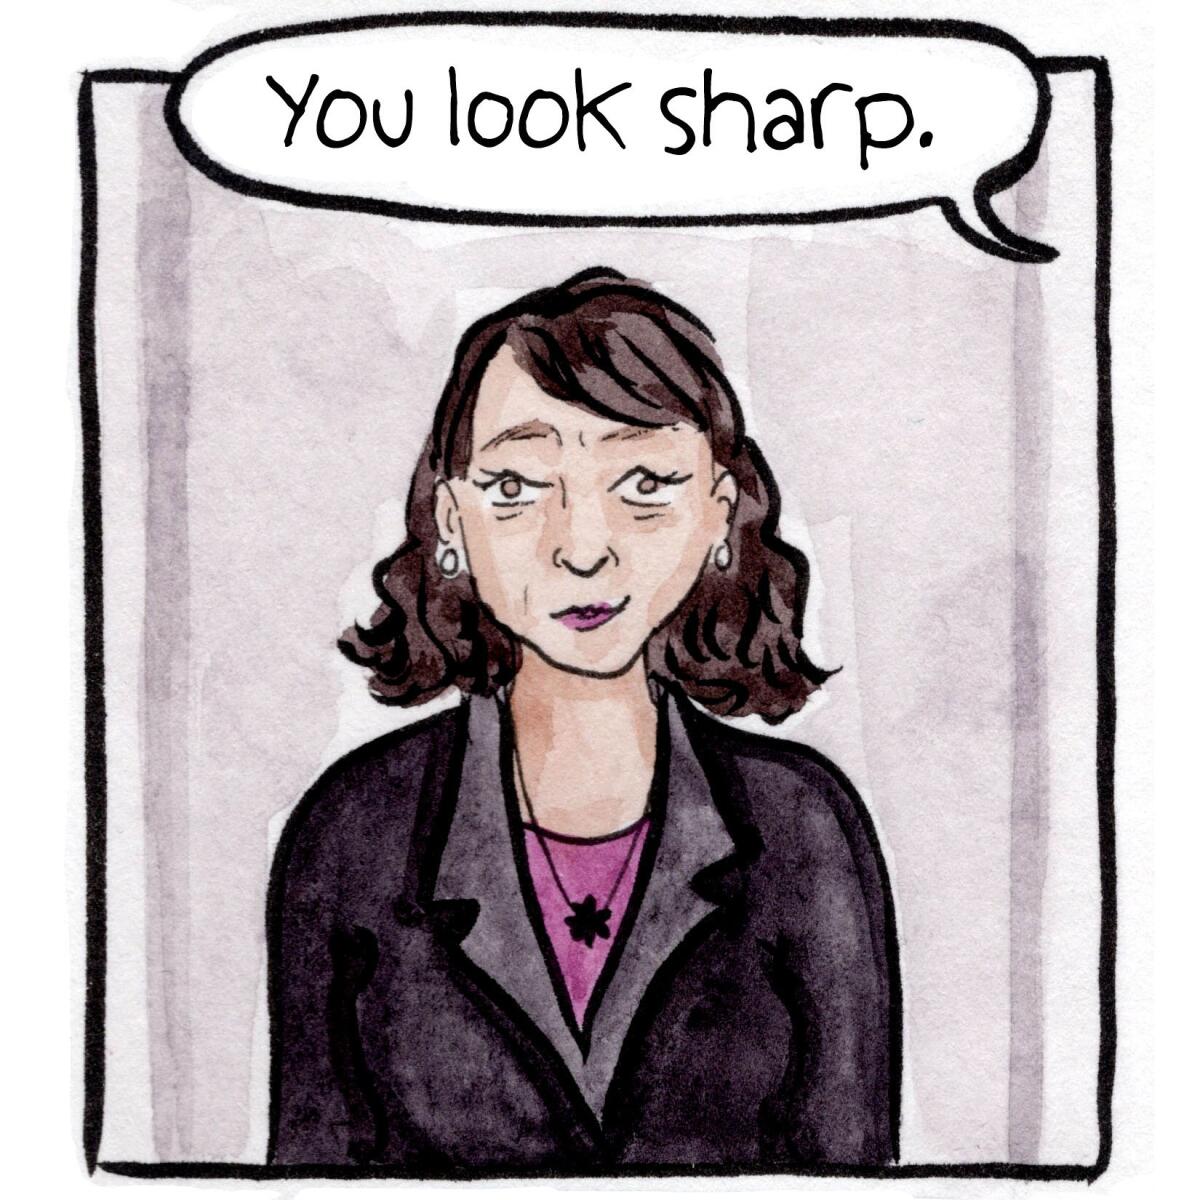 Someone says, "You look sharp," to a woman in a blazer.